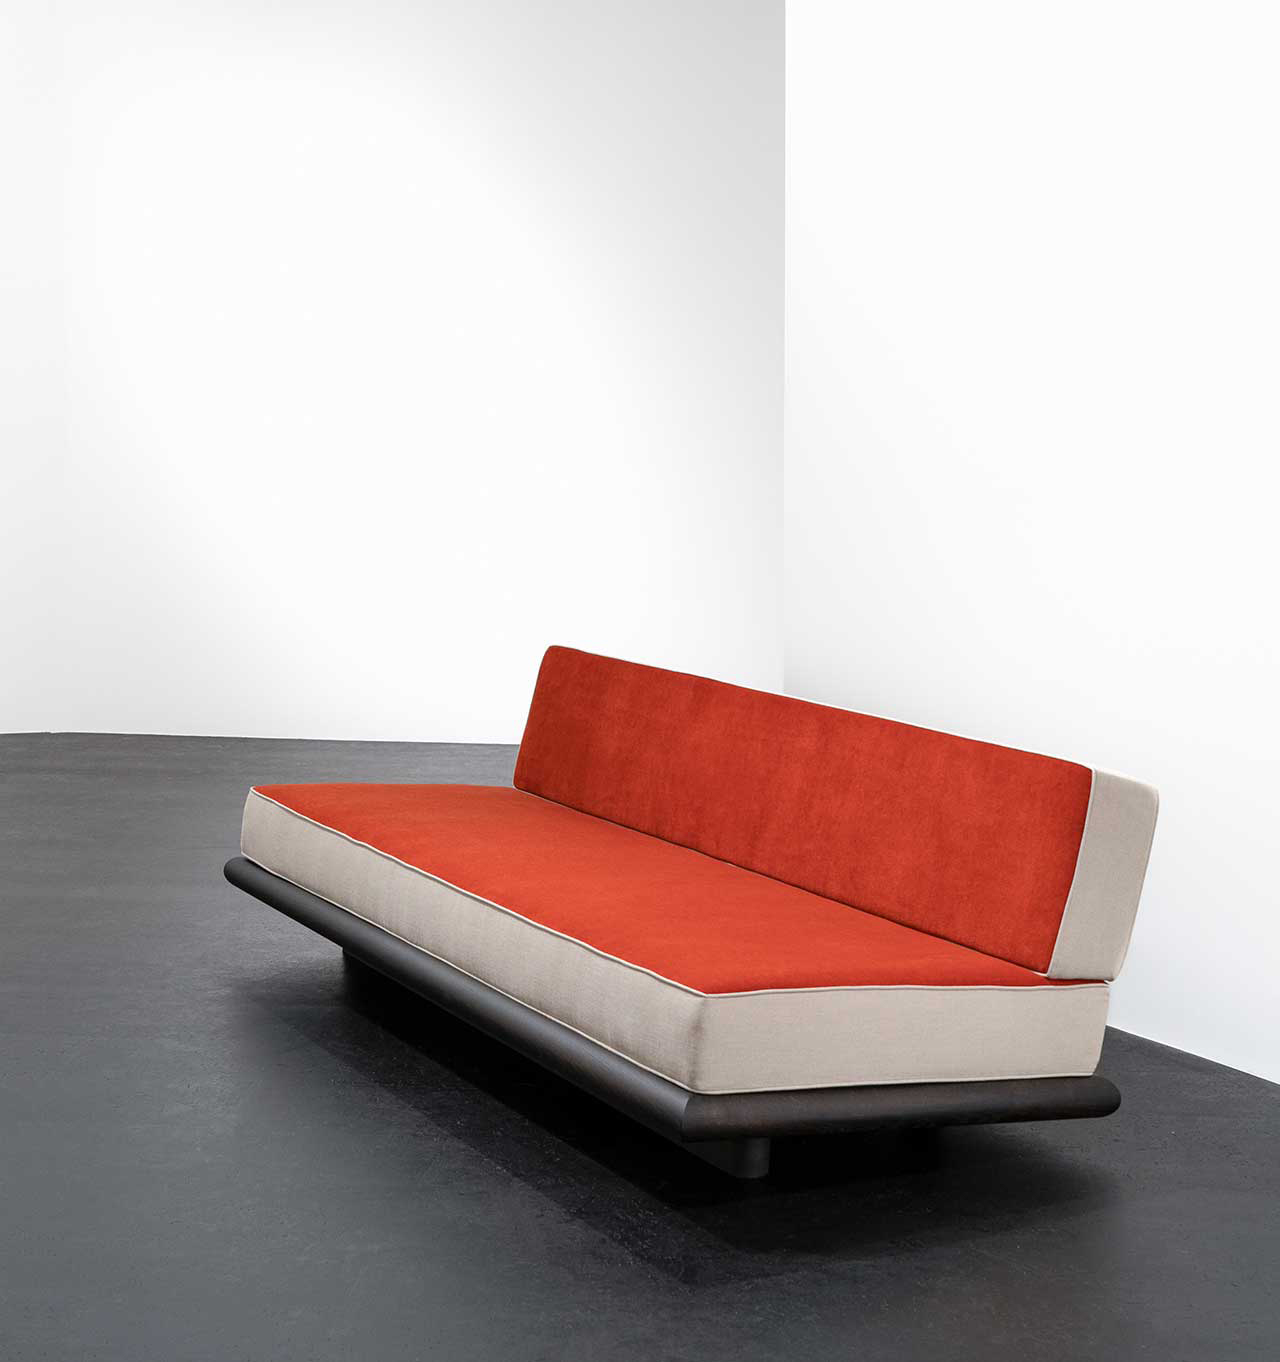 Ann Demeulemeester Debuts Her First Furniture Line With Serax